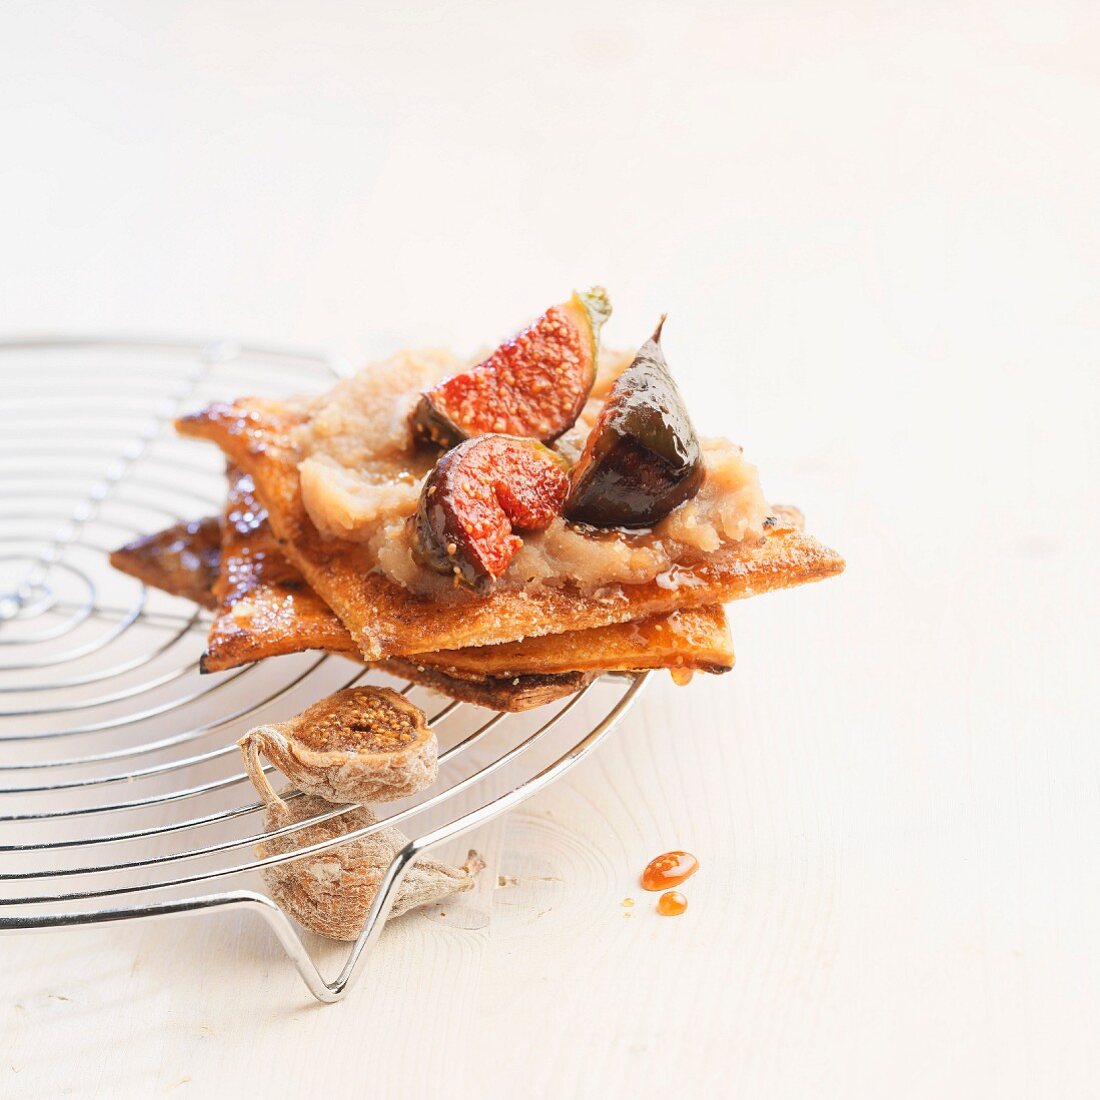 Flaky pastry with figs and chestnut cream